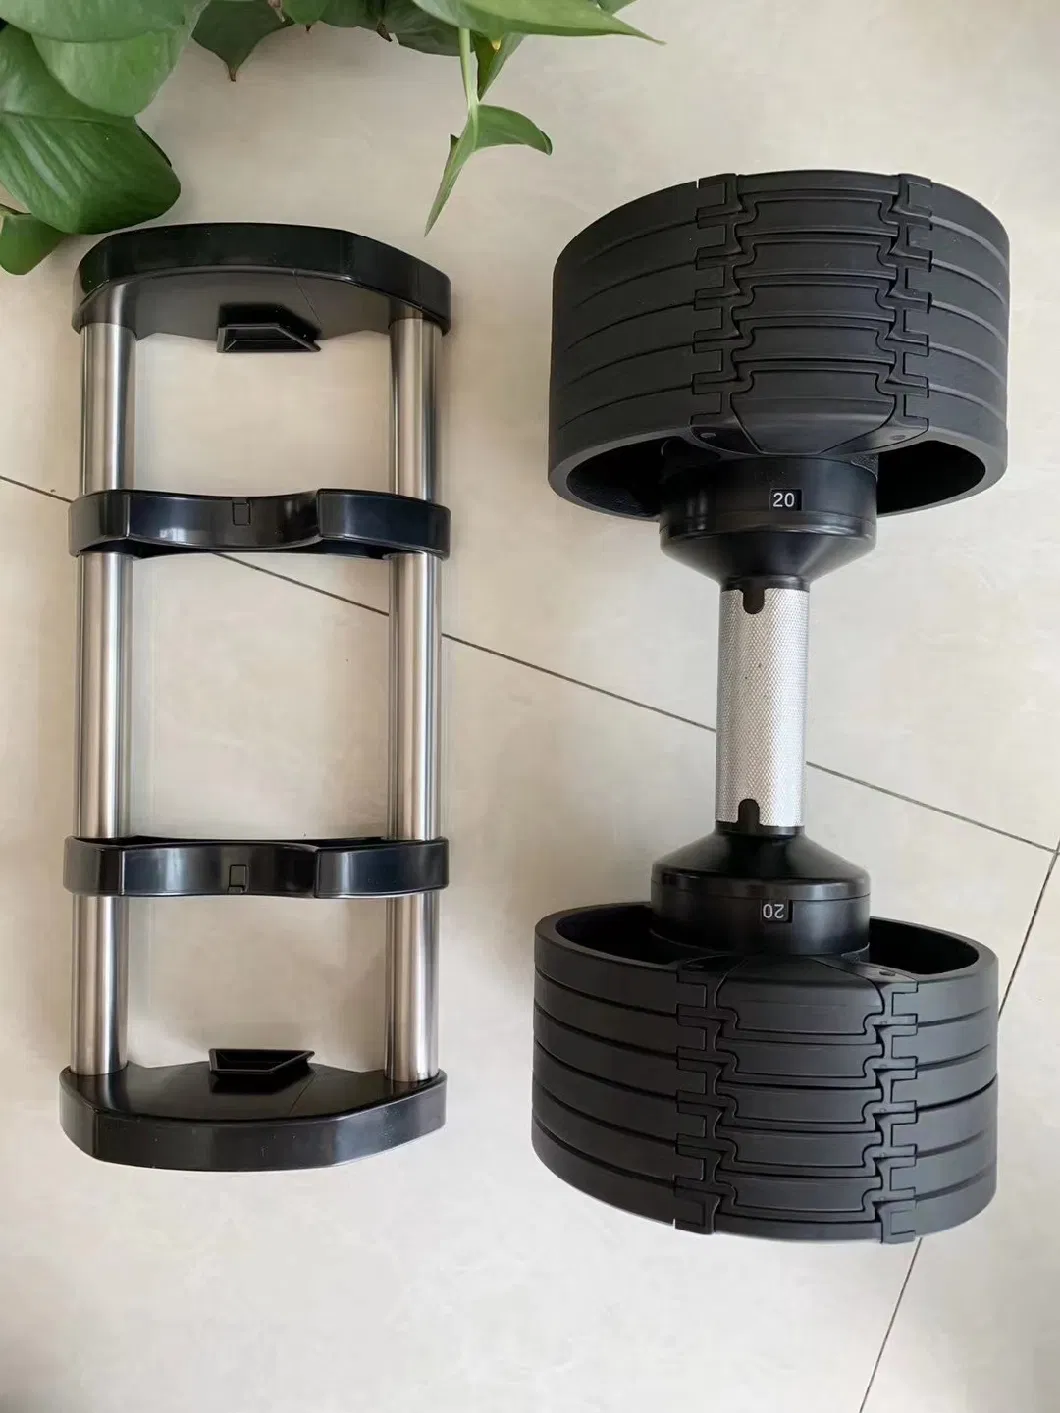 Hot Sale Gym Free Weights Weight Lifting Cast Iron Adjustable Dumbbells 20kg/45lb with Color Available